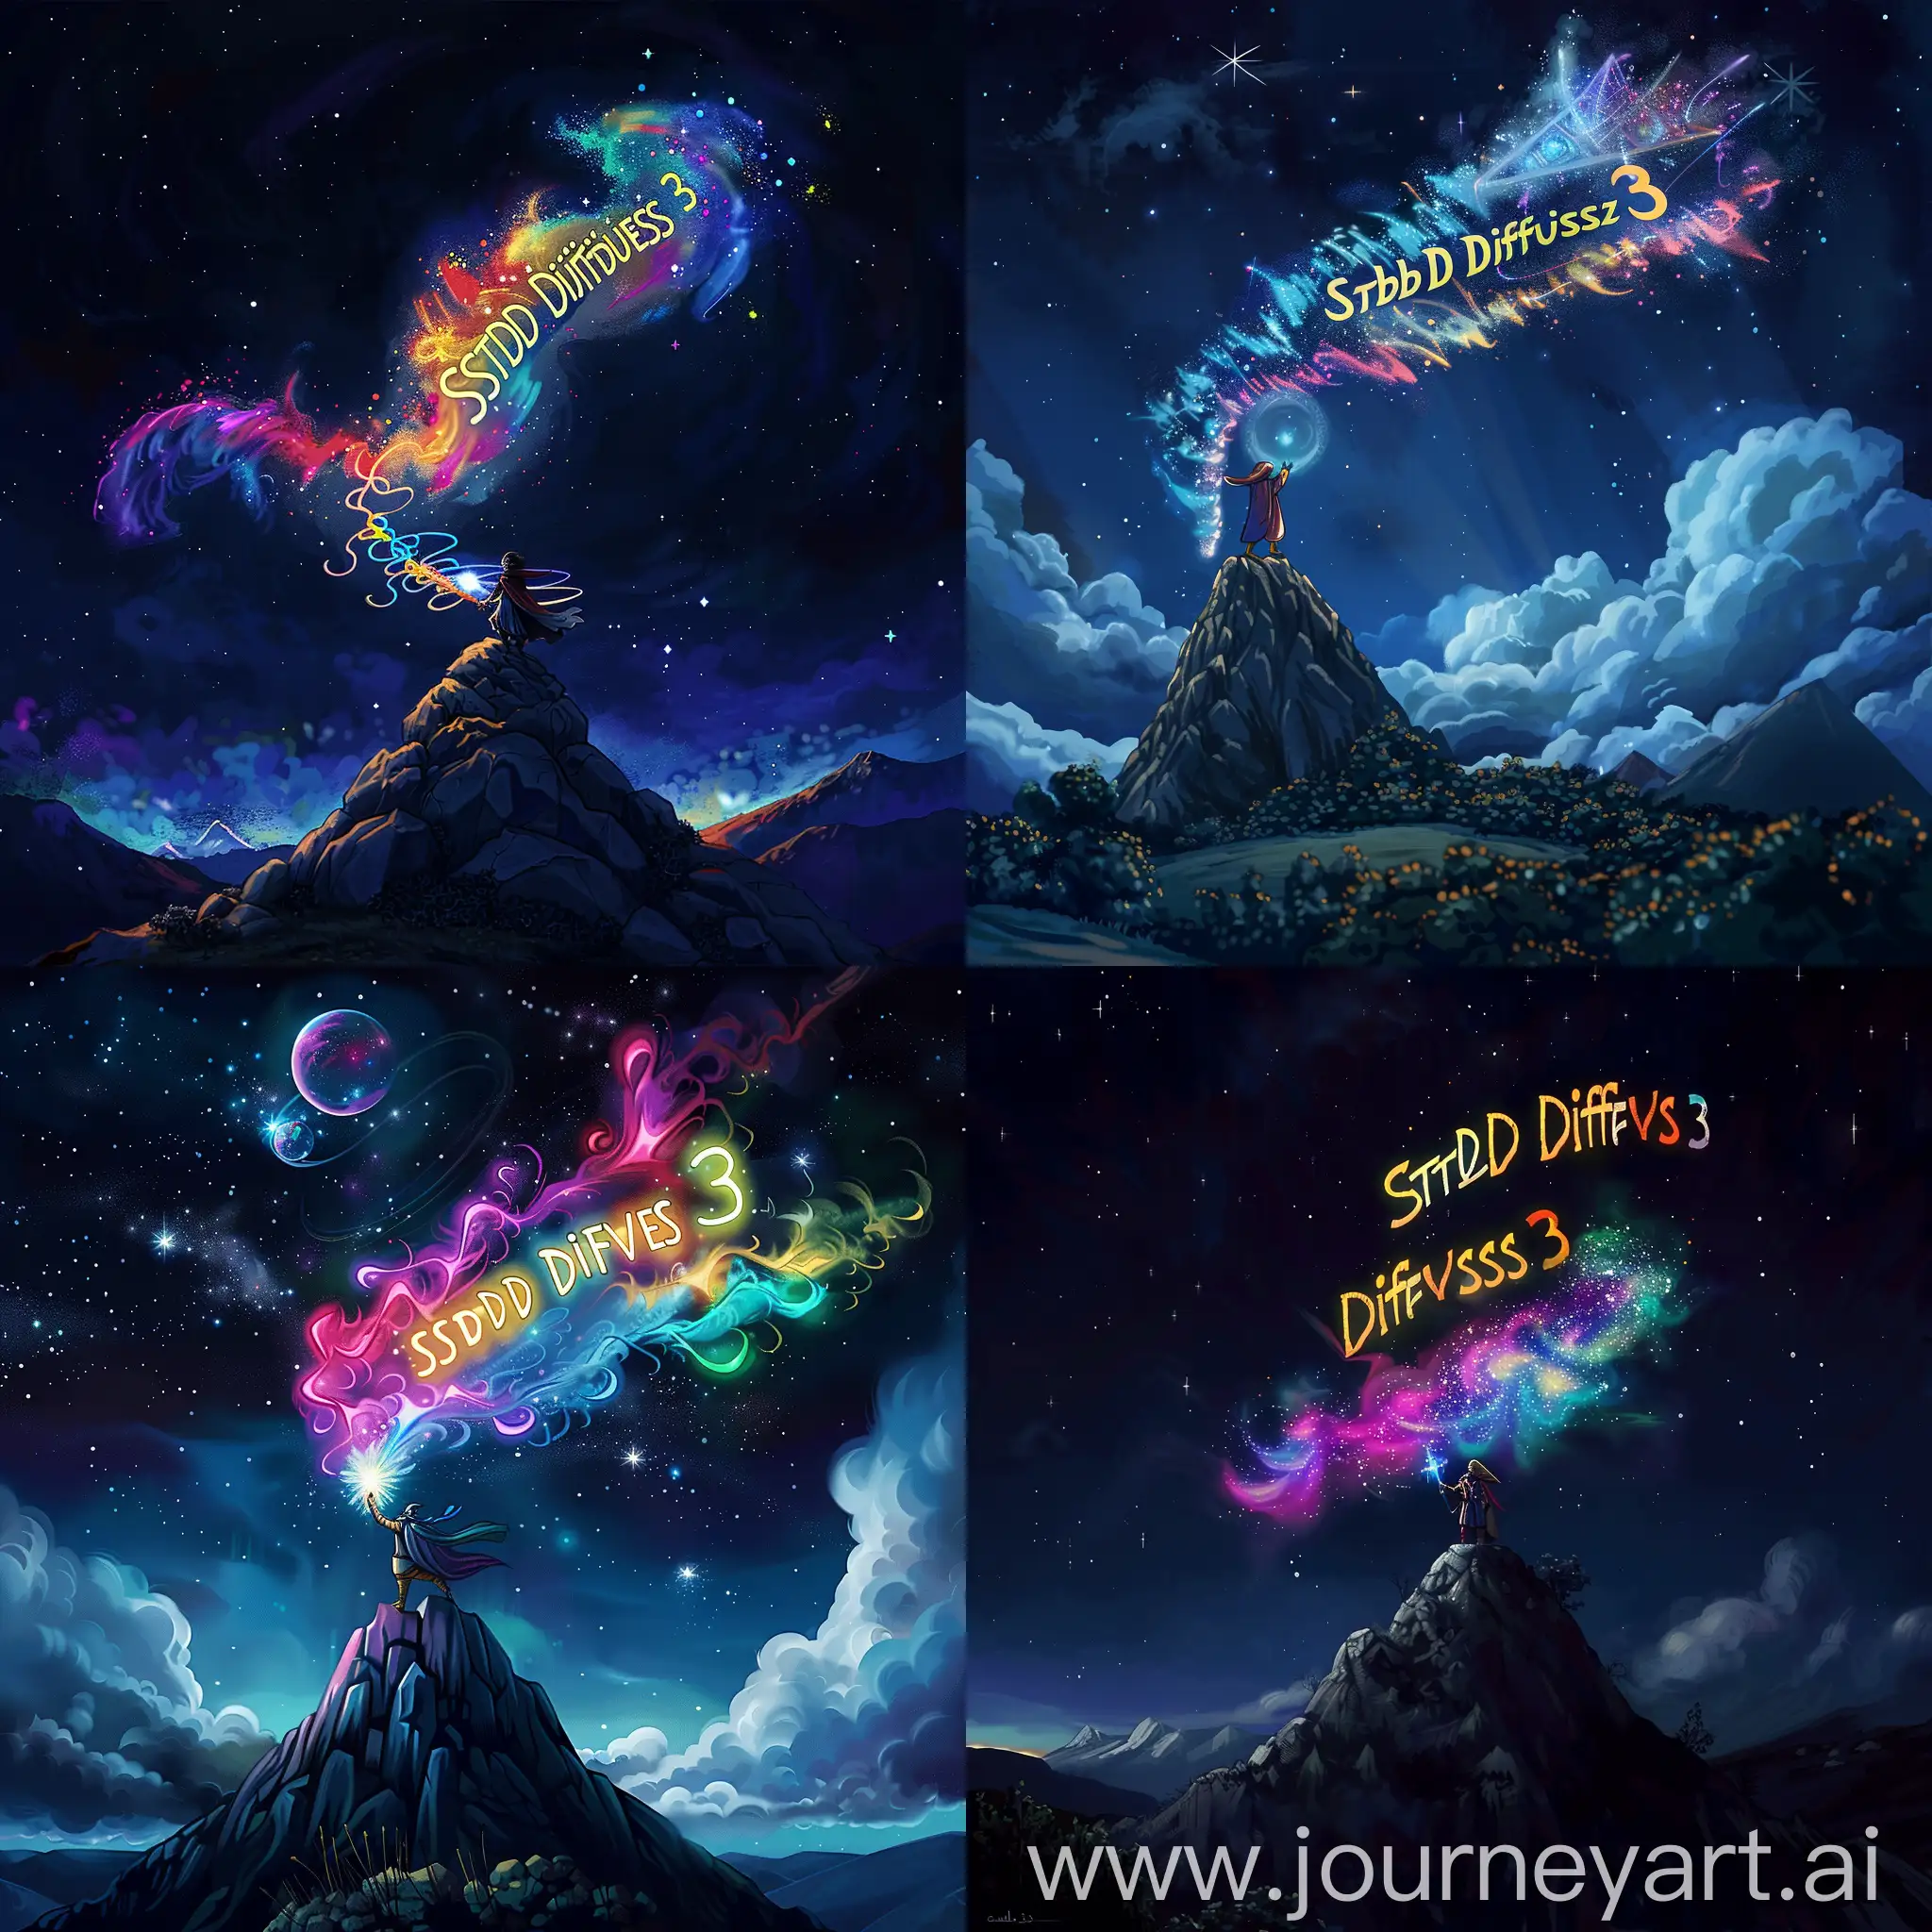 Majestic-Wizard-Casting-Cosmic-Spell-on-Mountain-Peak-at-Night